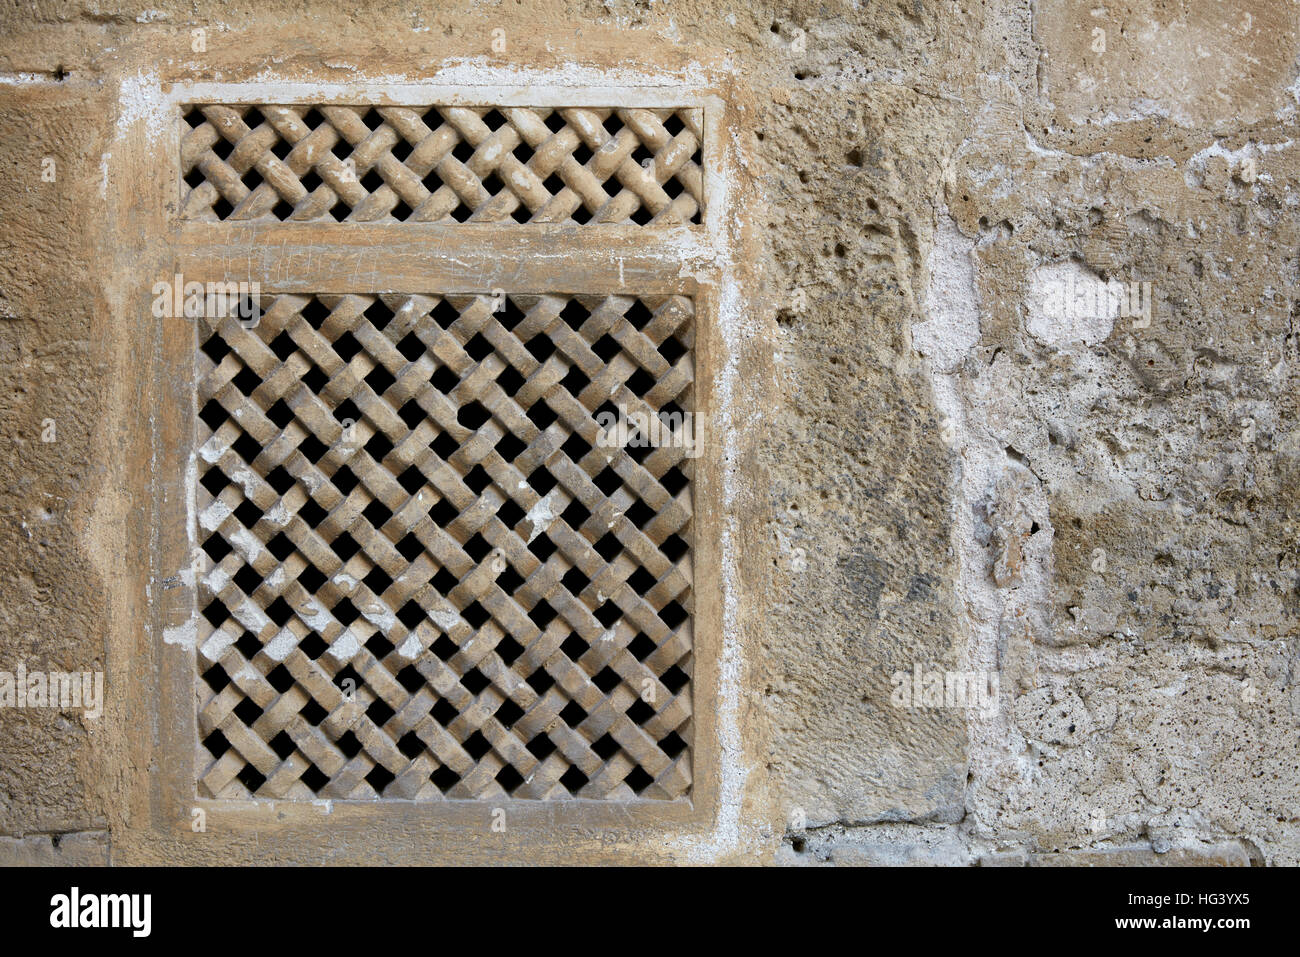 Architectural detail, Matera, Italy. Close up of a vent. Stock Photo